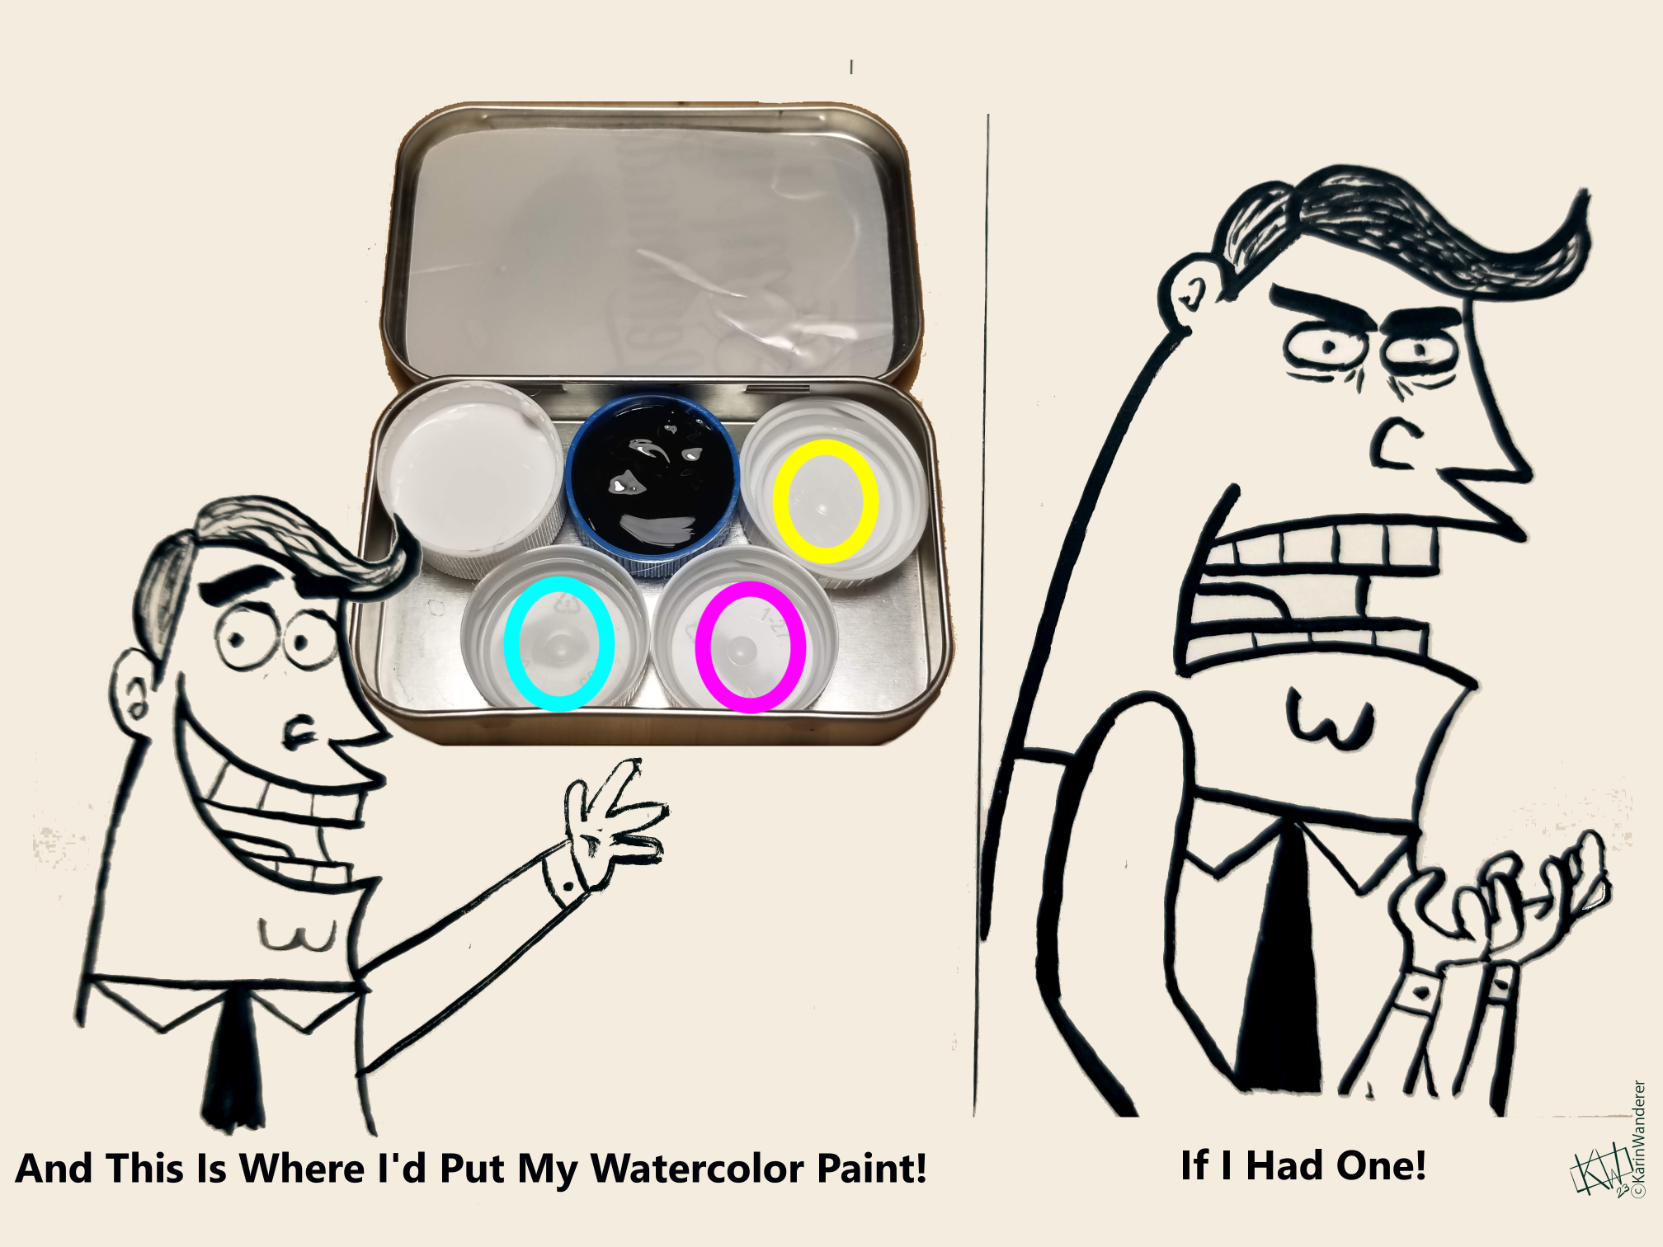 2 Panel Meme:
Panel 1: Mr. Turner painted in black gouache happily points to a mostly empty DIY paint palette, saying "And this is where I'd put my watercolor paint!" 
Panel 2: Angry Mr. Turner glares & shouts "If I had one!"